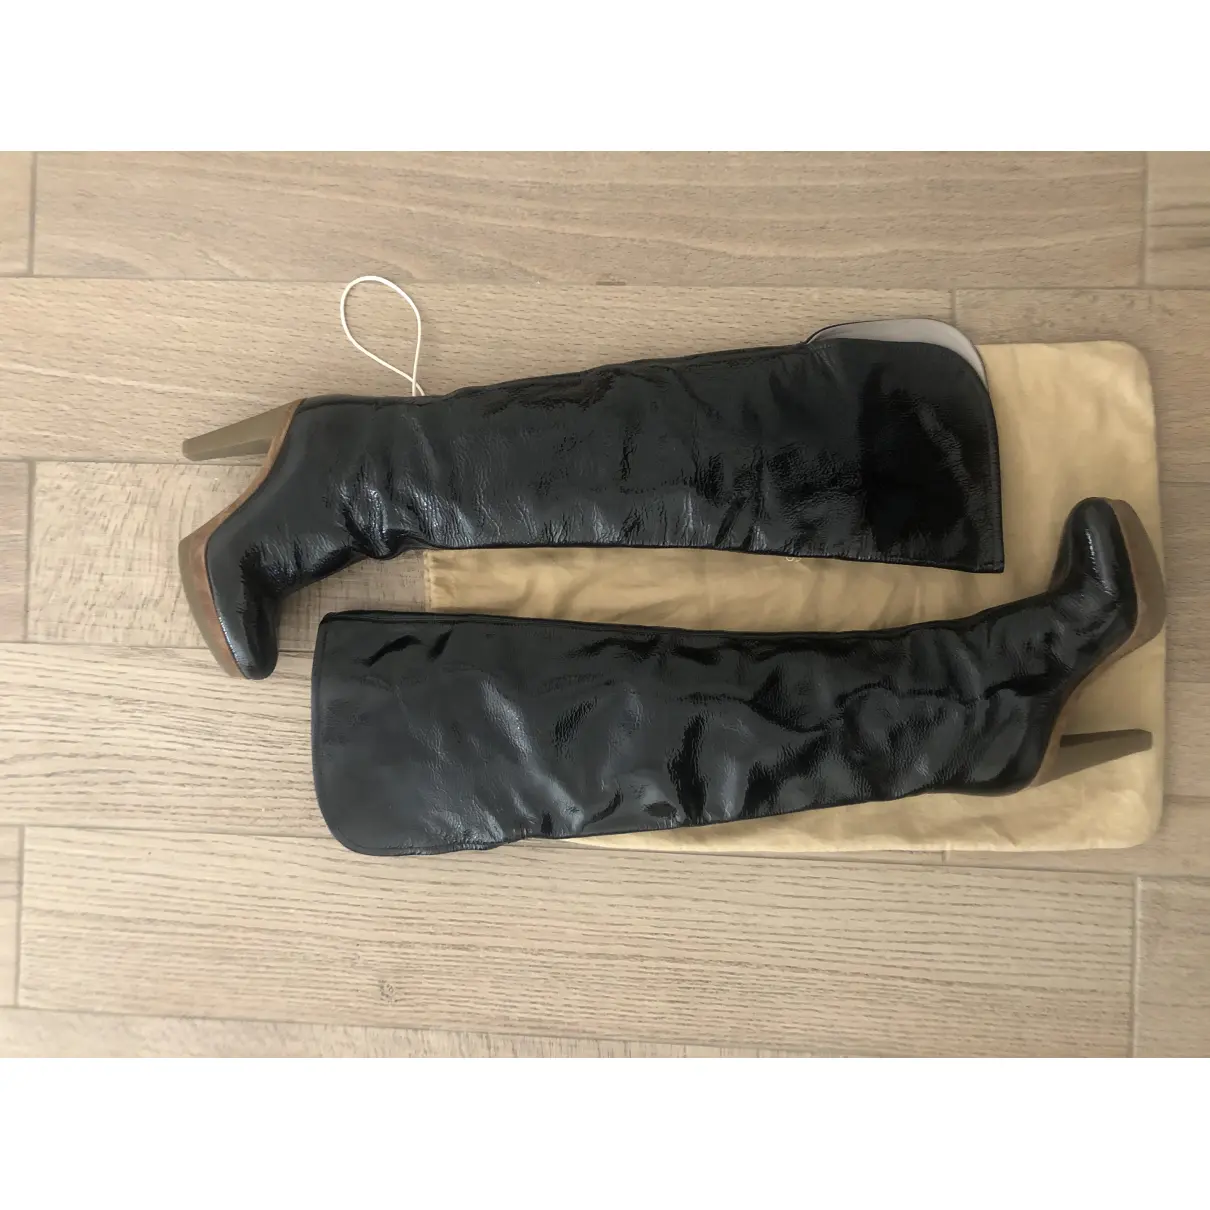 Patent leather boots Sergio Rossi